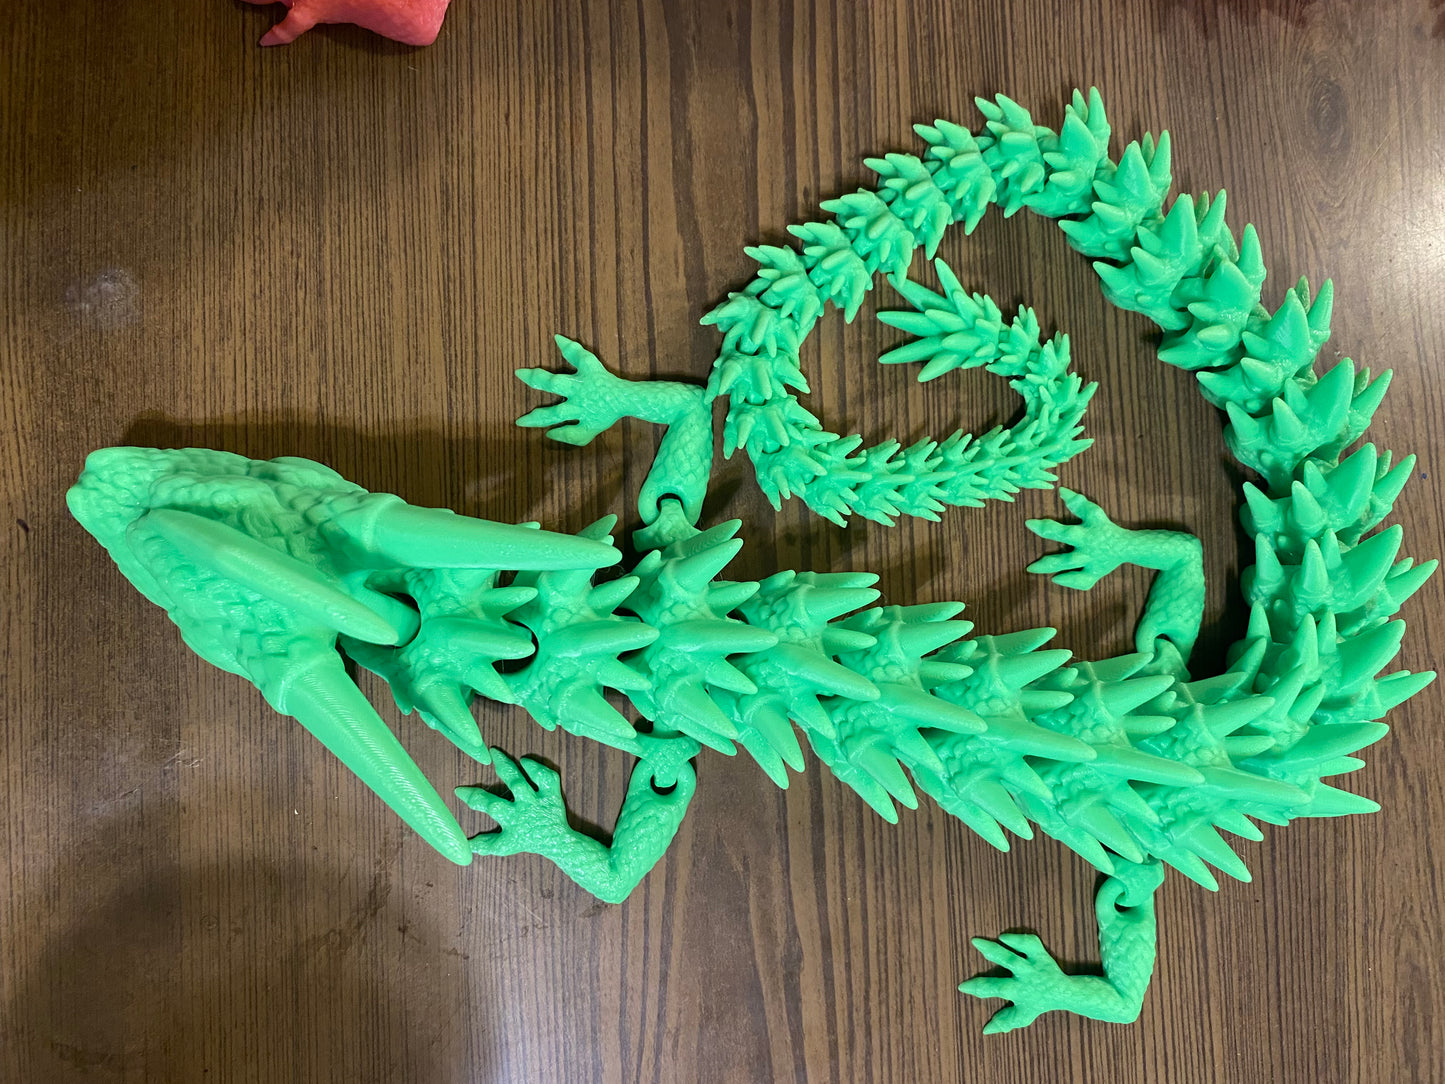 3D printed articulated dragon